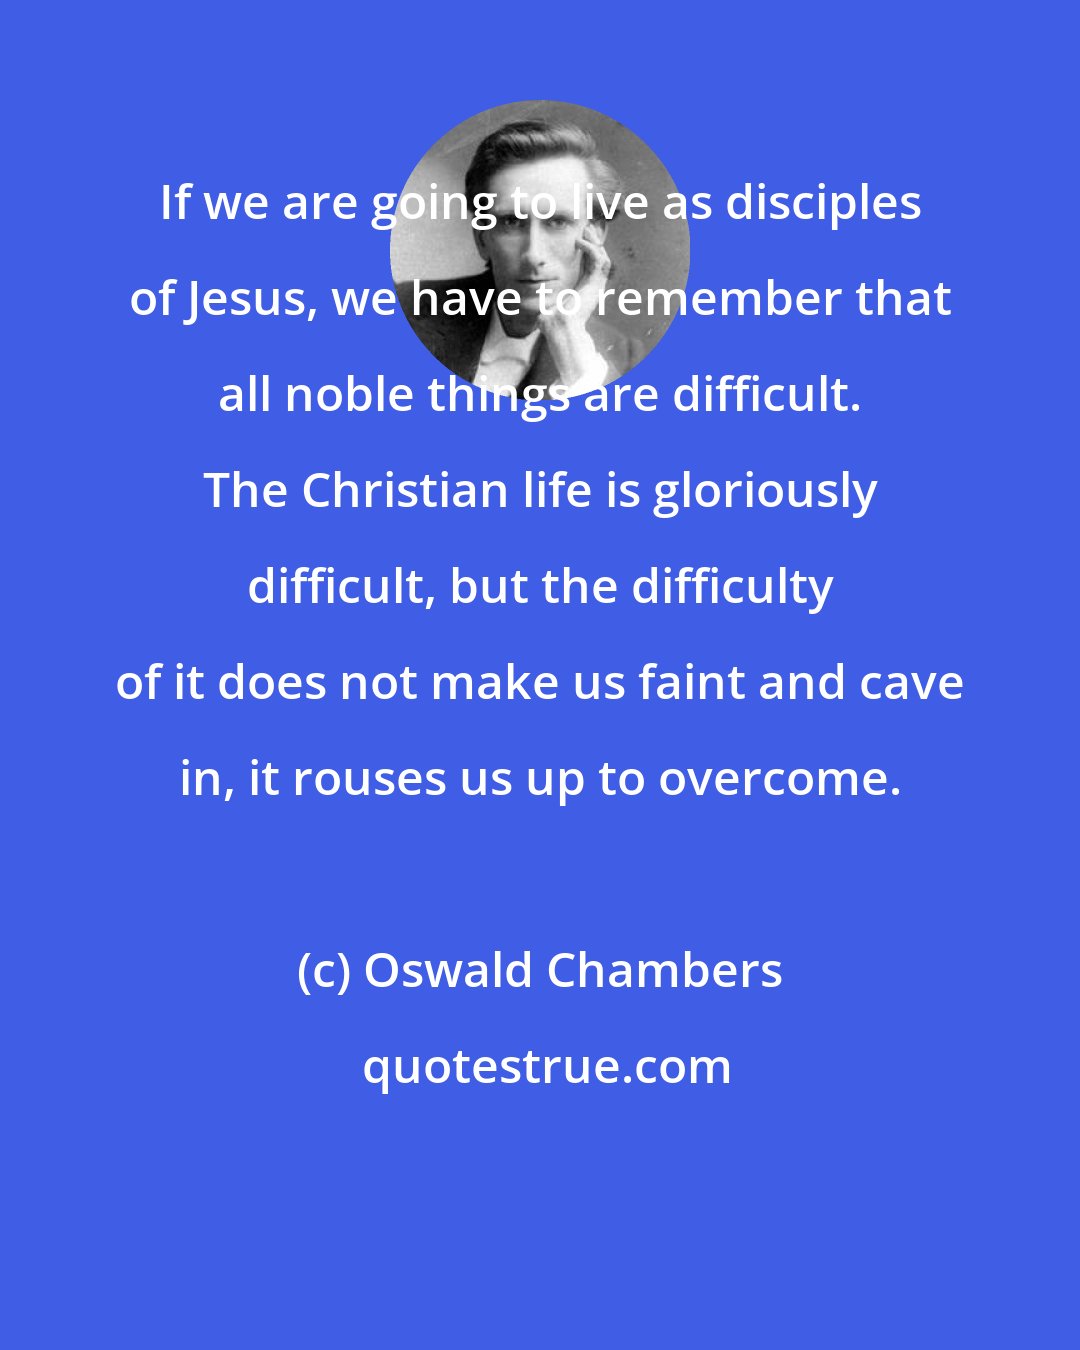 Oswald Chambers: If we are going to live as disciples of Jesus, we have to remember that all noble things are difficult. The Christian life is gloriously difficult, but the difficulty of it does not make us faint and cave in, it rouses us up to overcome.